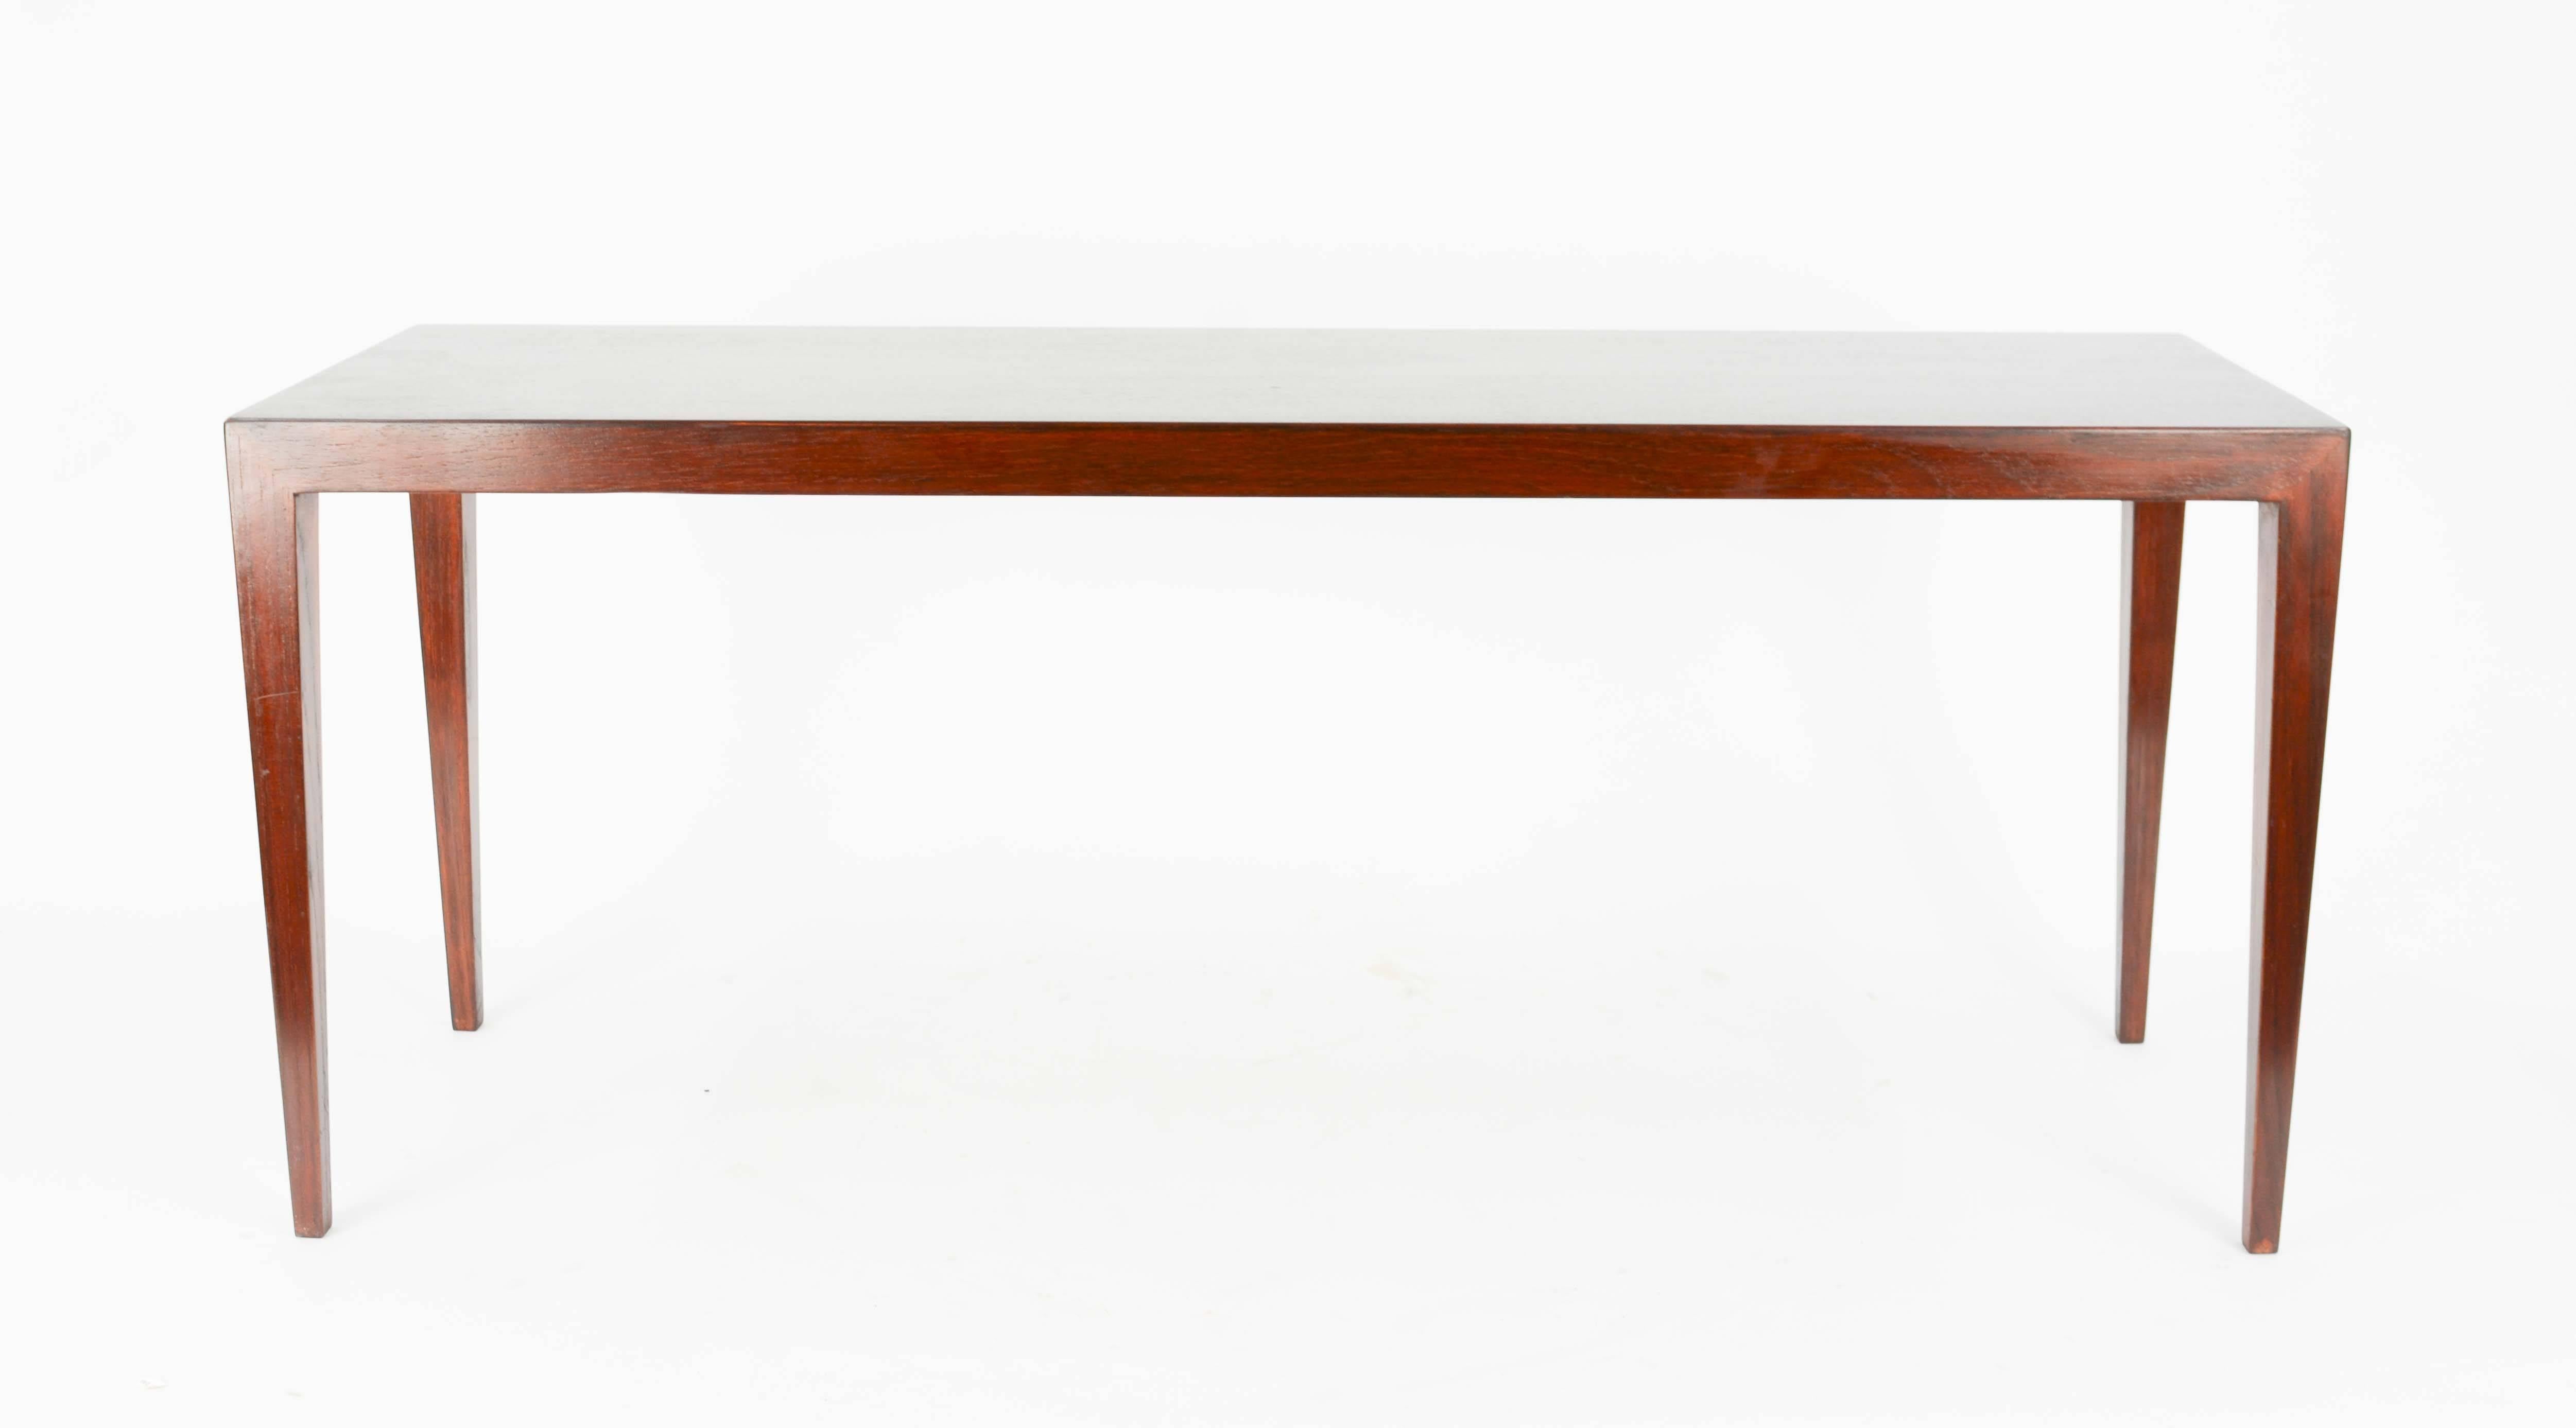 An elegant coffee table by Severin Hansen Jr for Haslev Mobelfabrik. This rosewood.